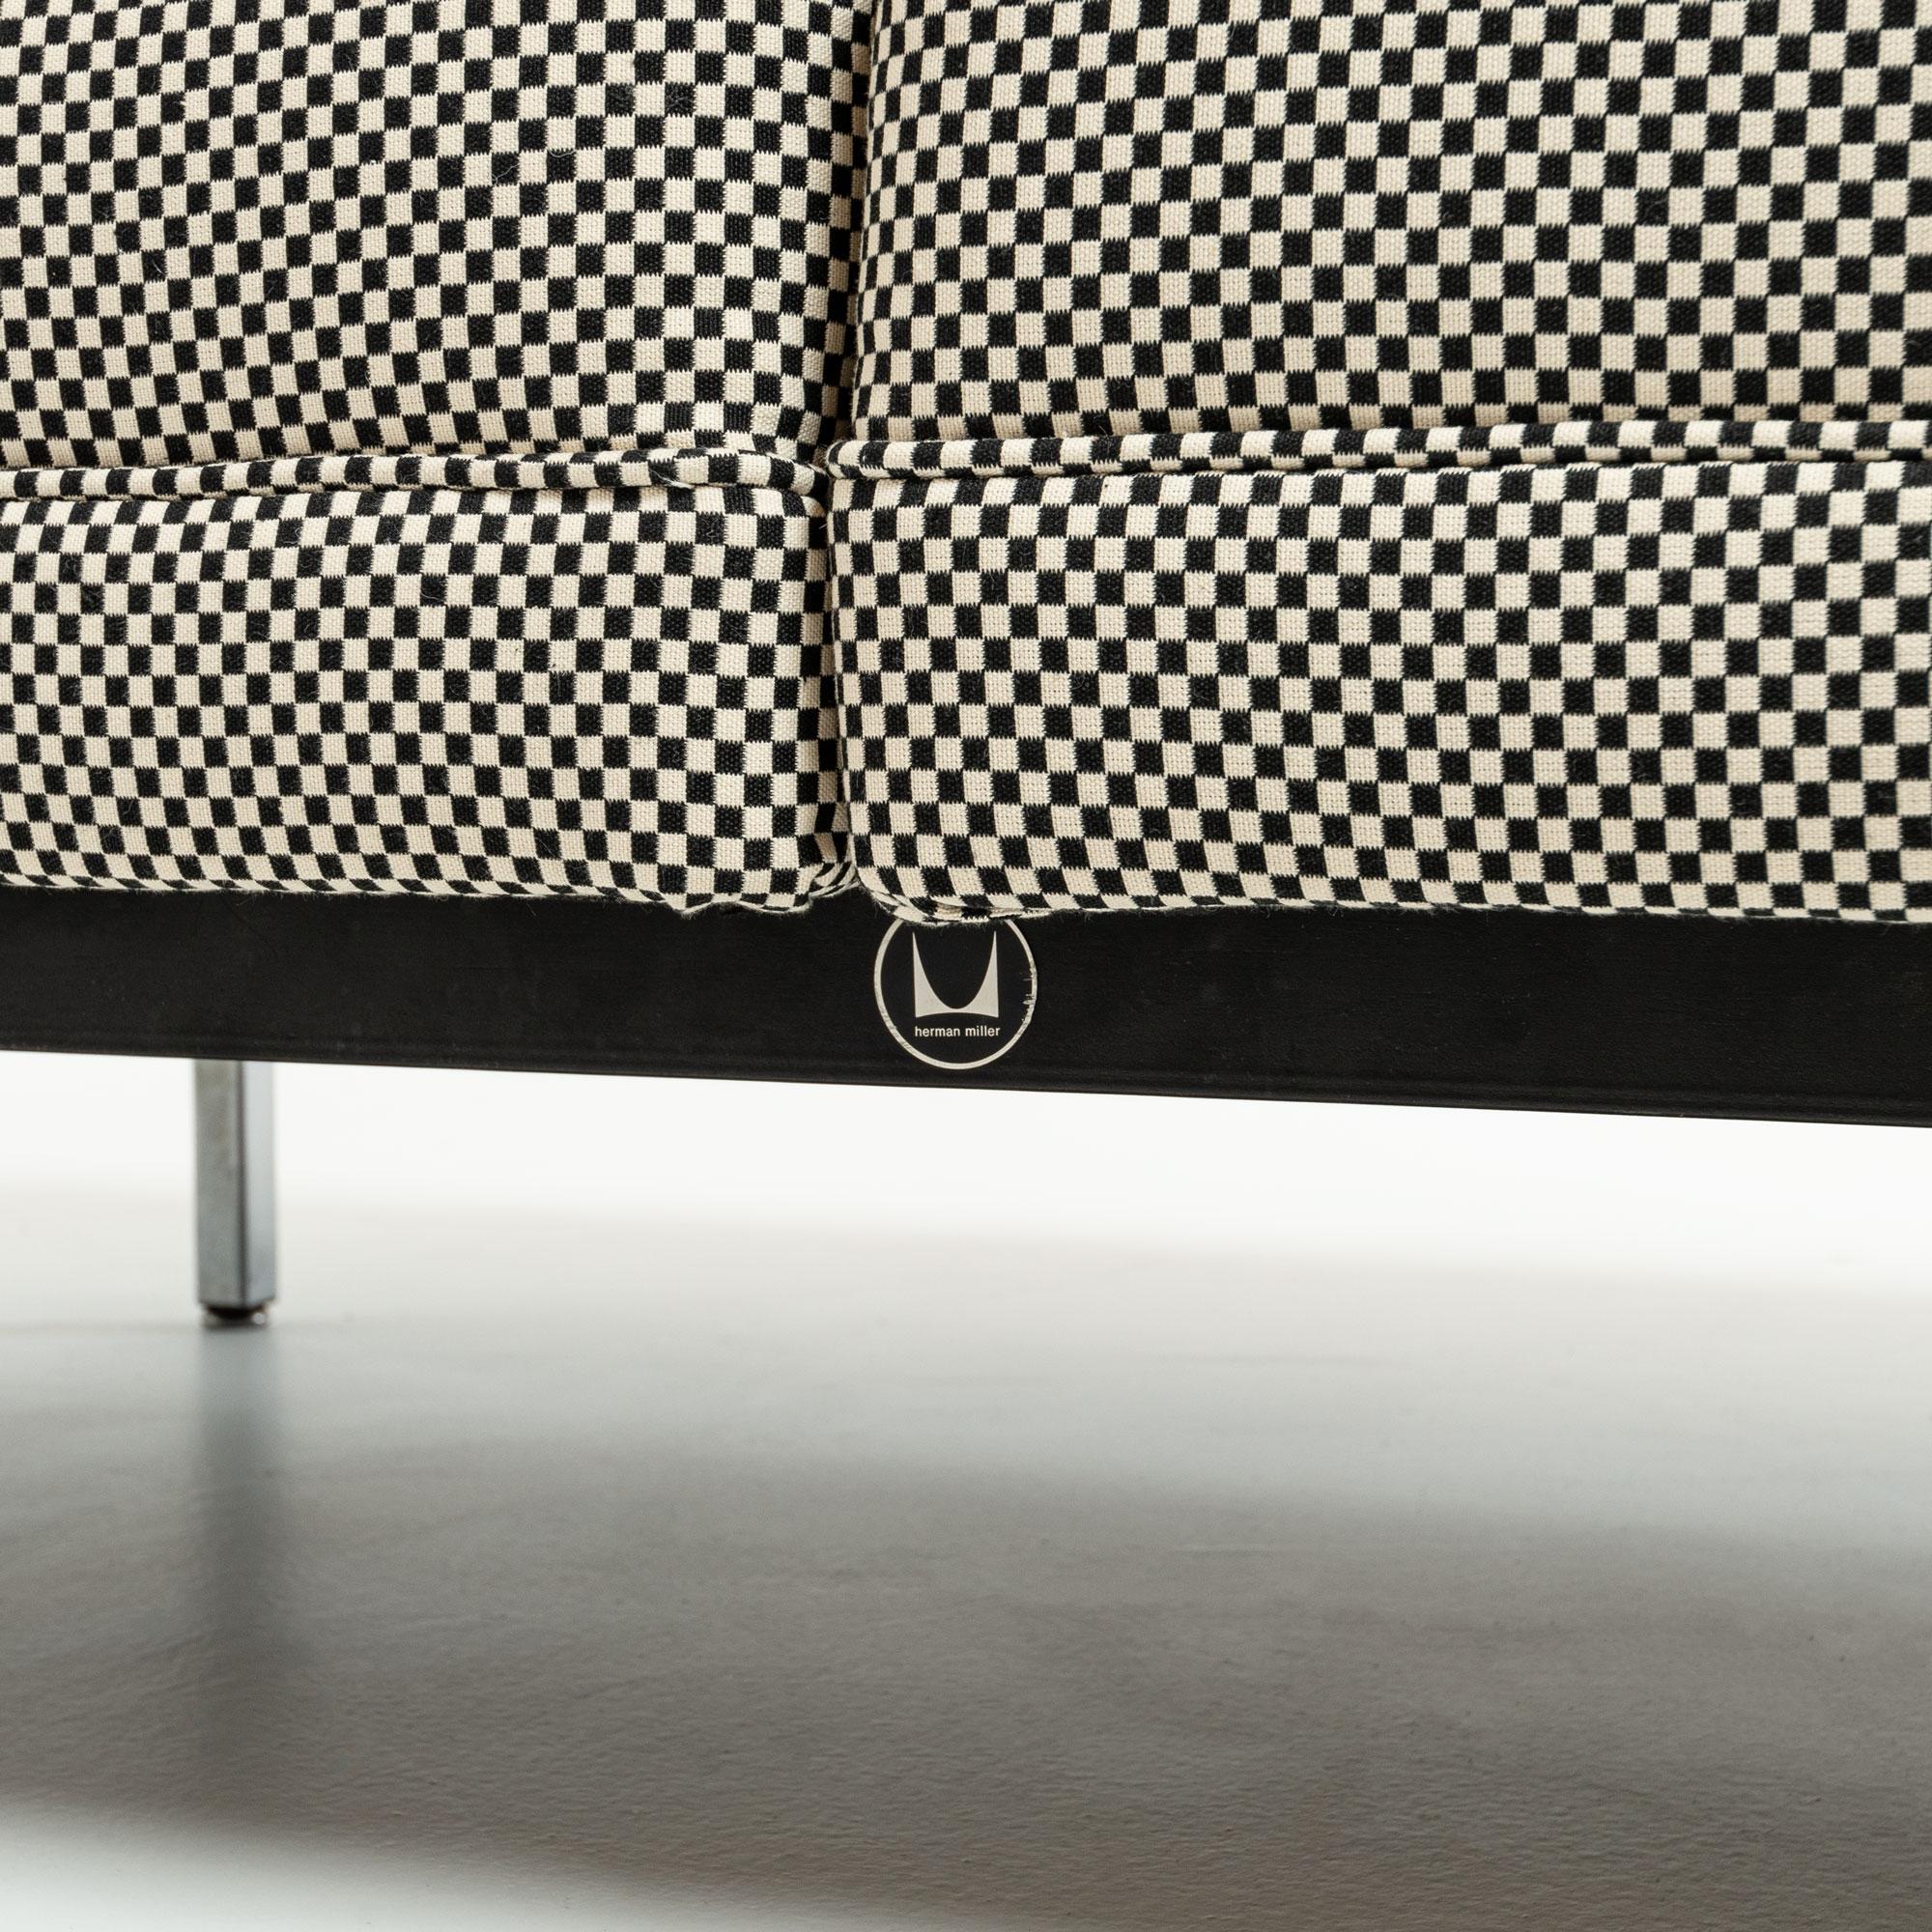 Steel George Nelson Modular Seating System Bench in Alexander Girard Checker Fabric For Sale